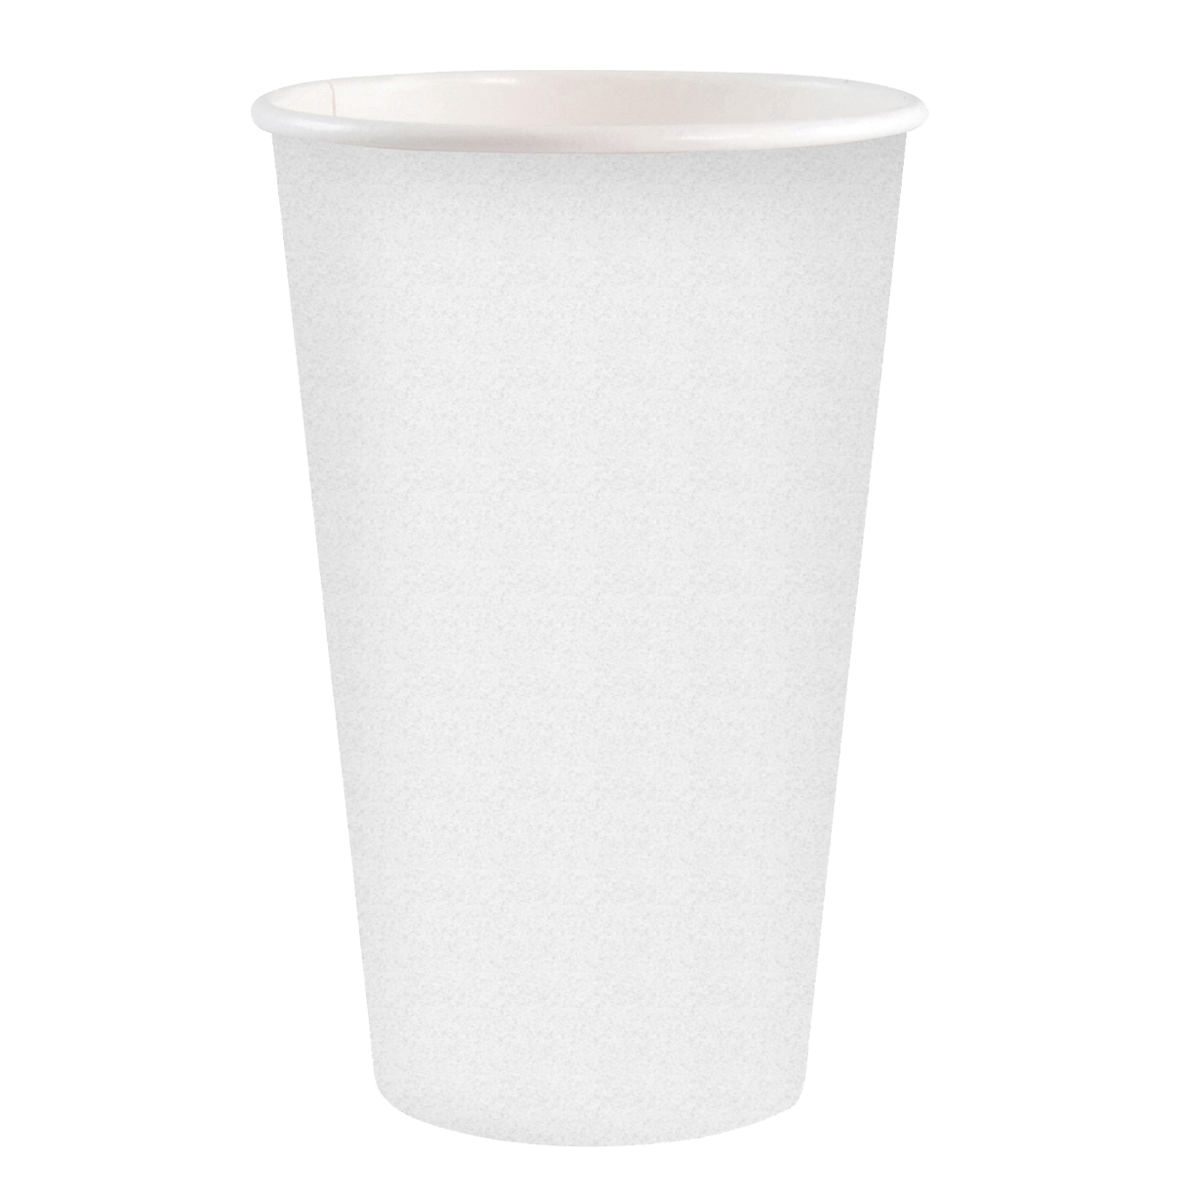 SW Hot Paper Cup White*, 16 oz.